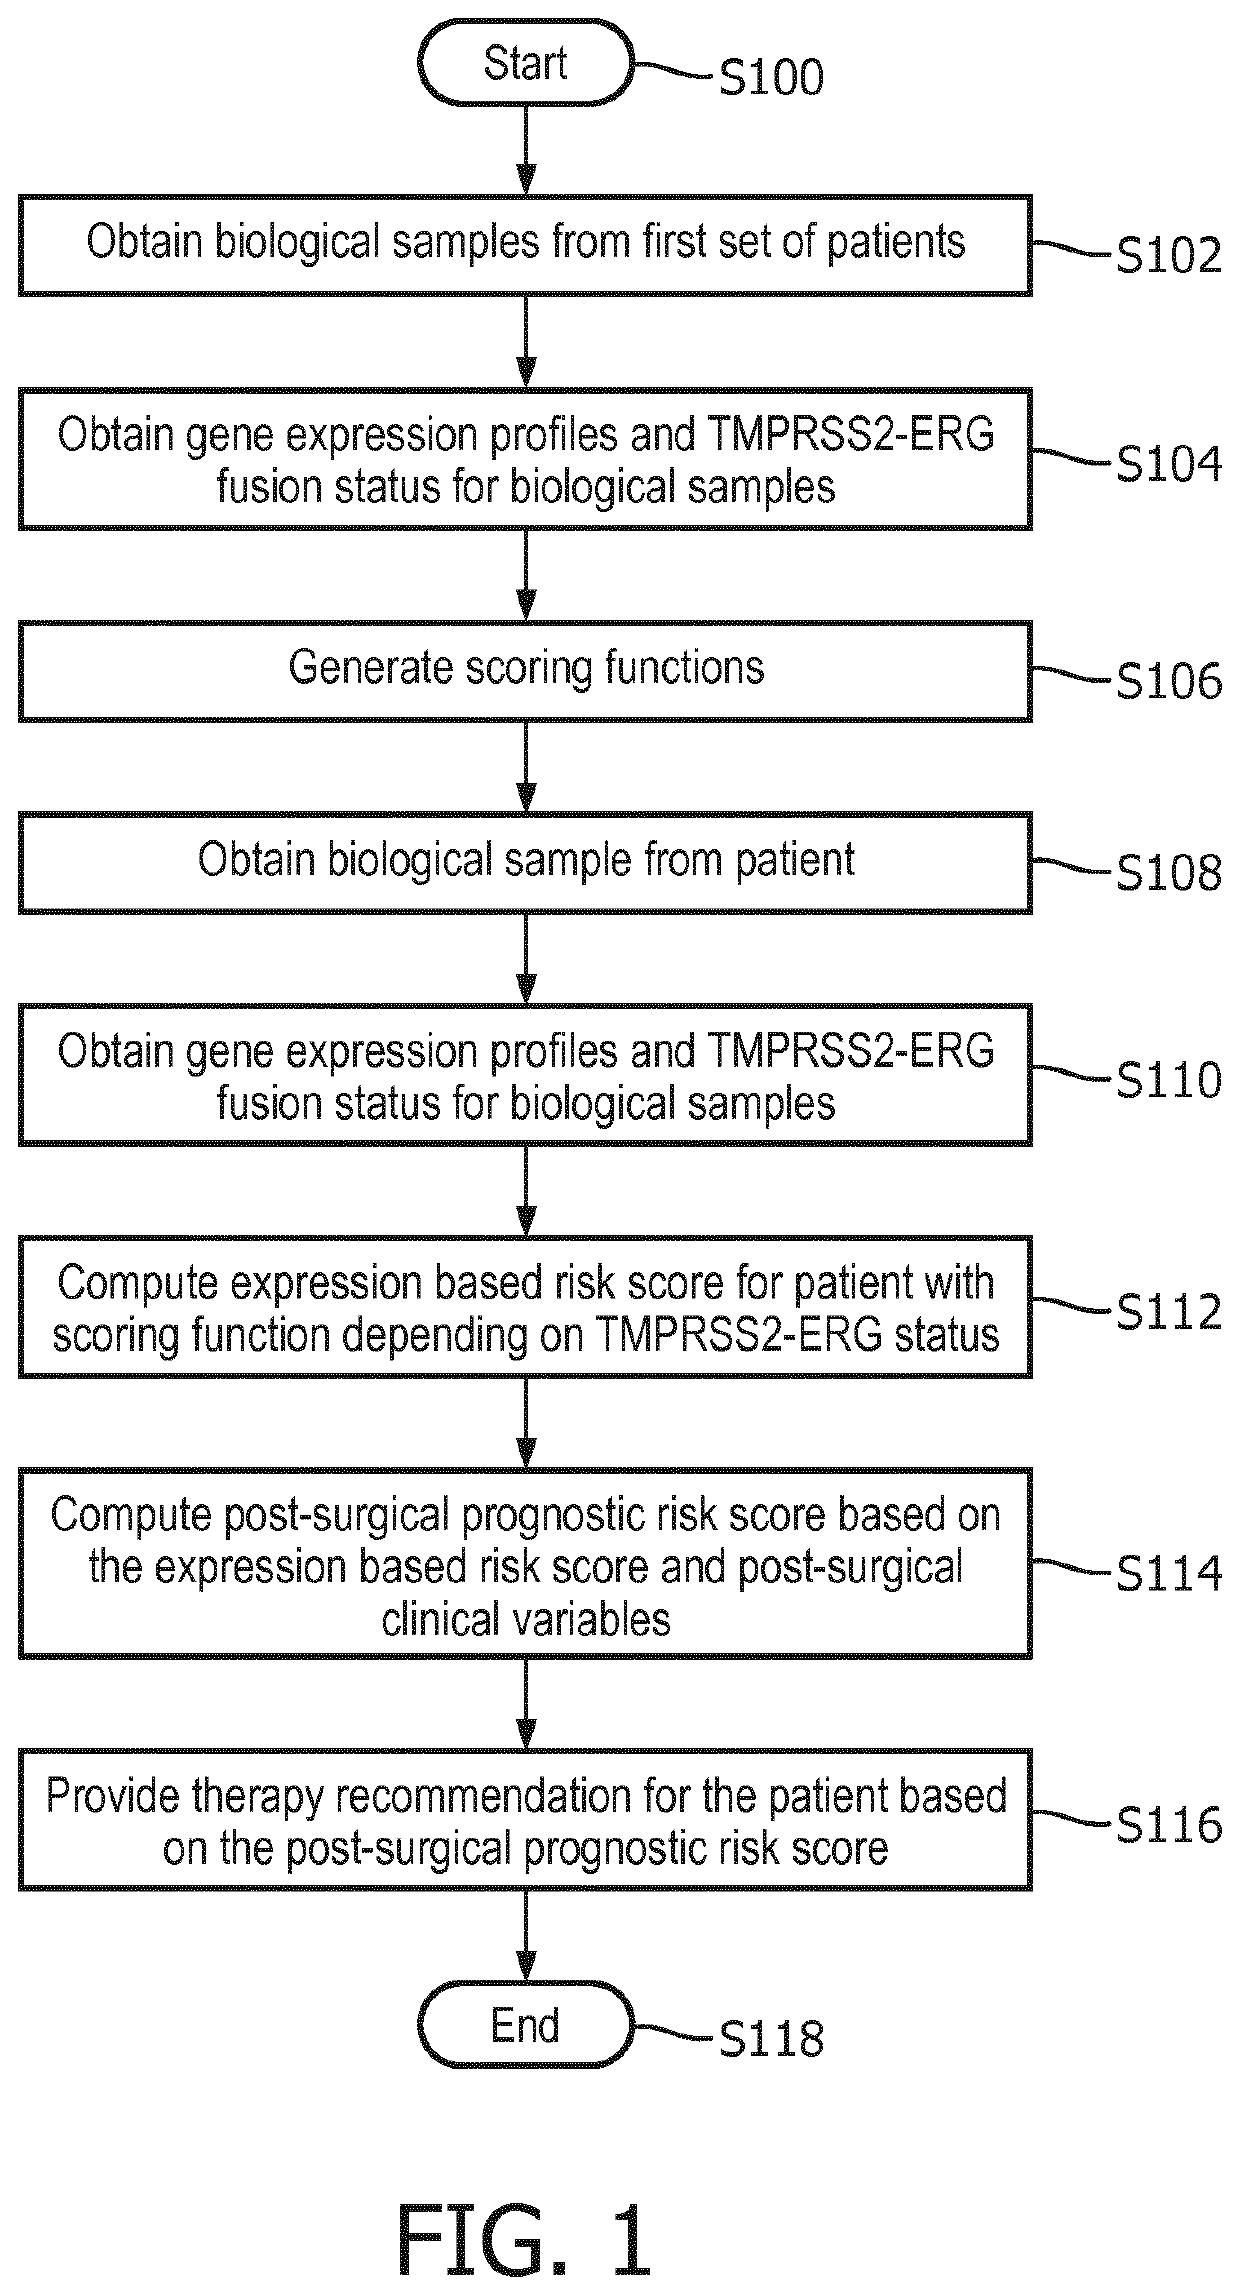 Post-surgical risk stratification based on pde4d variant expression, selected according to tmprss2-erg fusion status, and post-surgical clinical variables